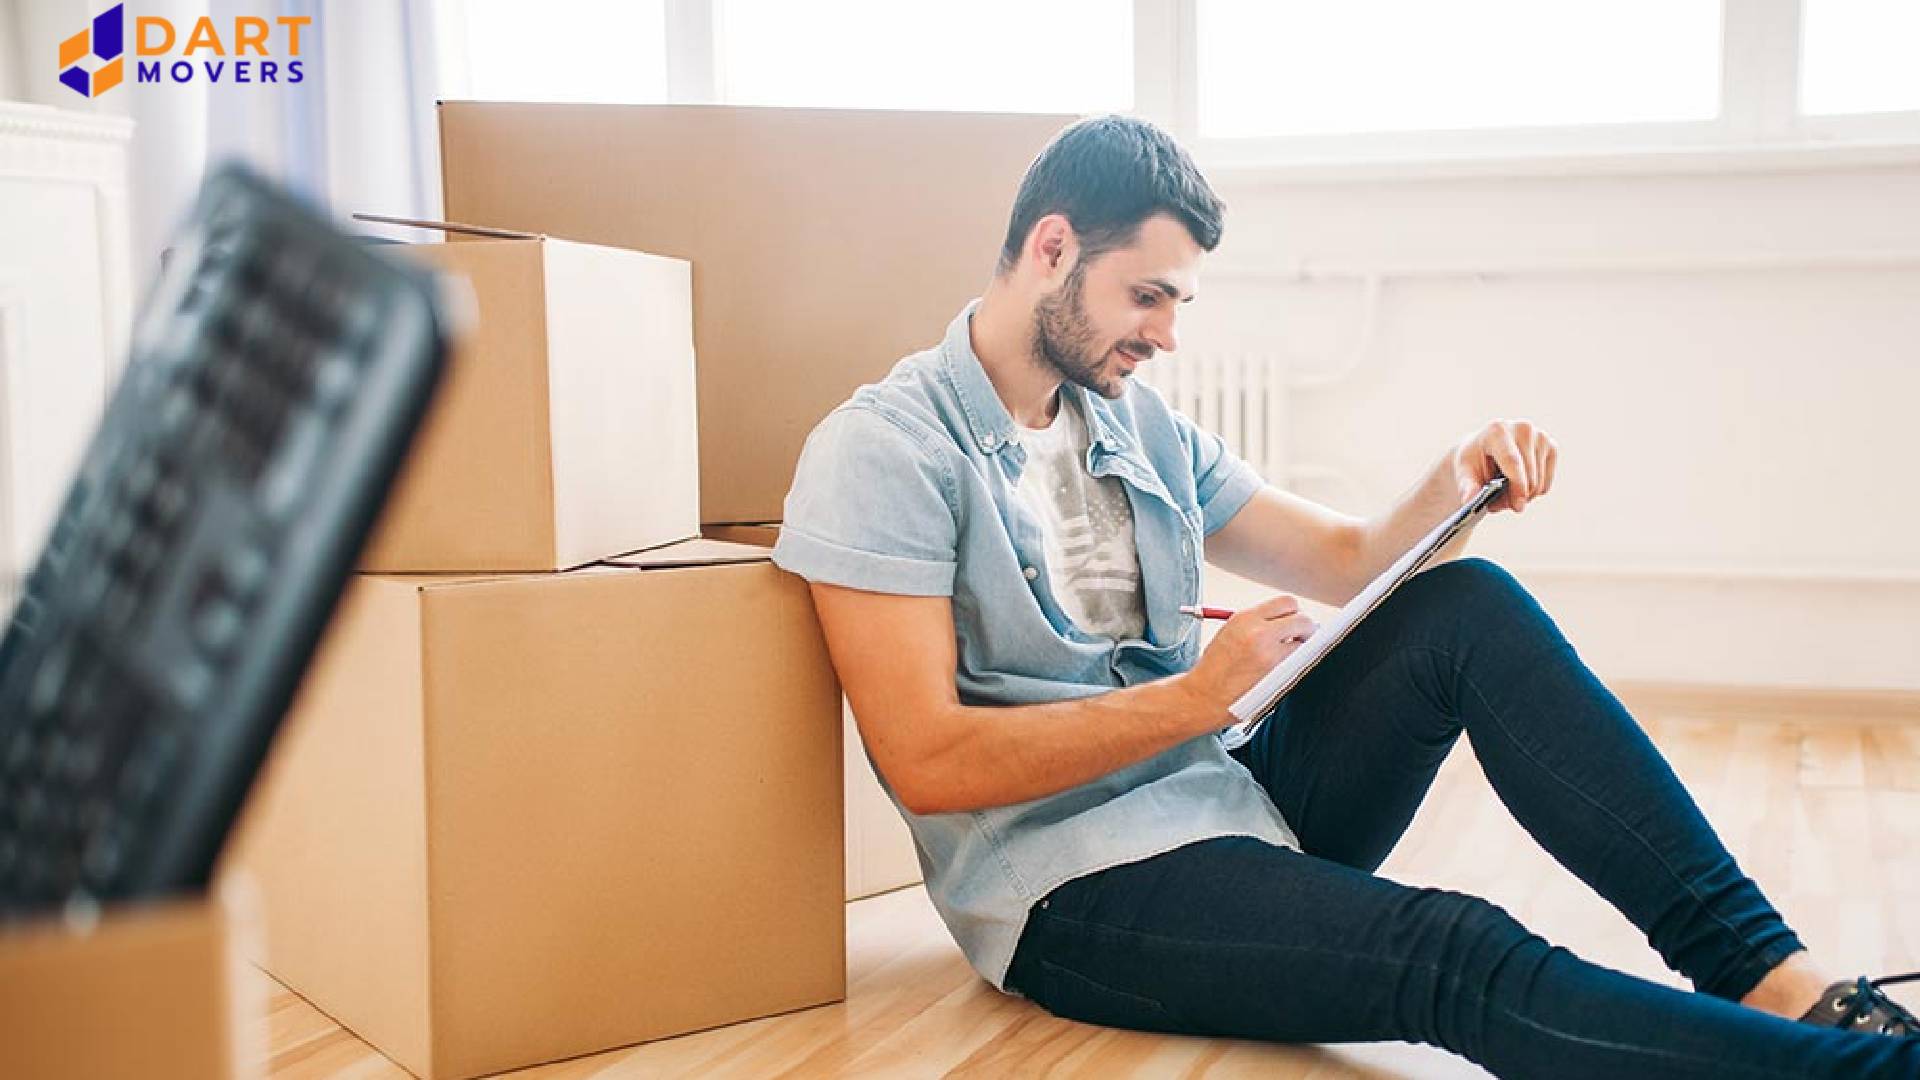 Packing tricks of villa movers in dubai